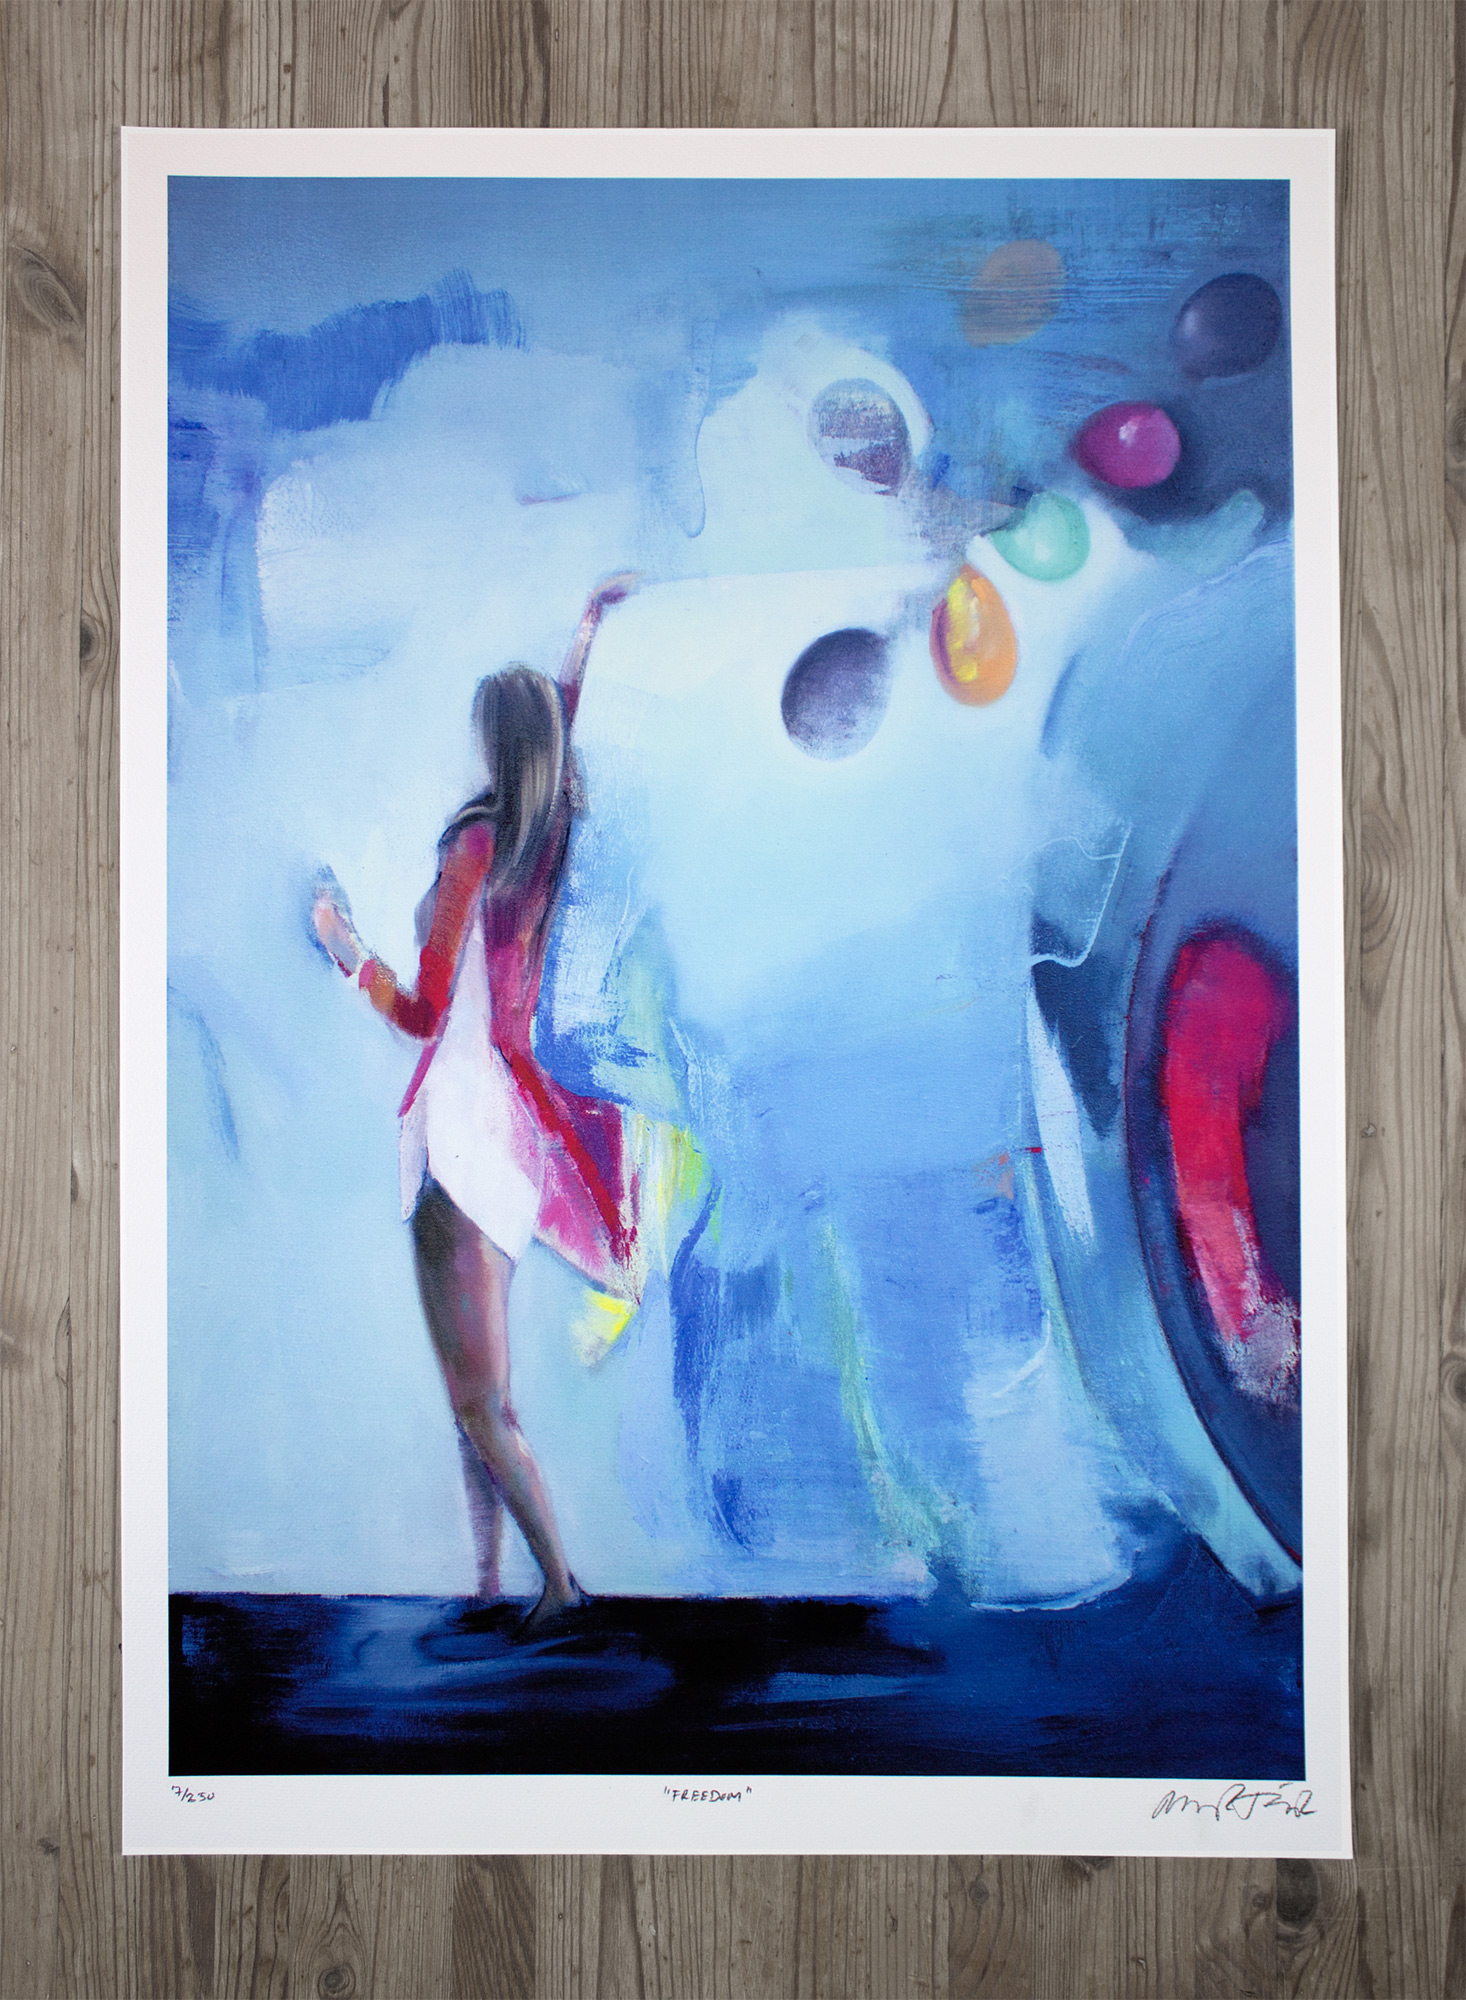 posters-prints, giclee-print, colorful, family-friendly, figurative, illustrative, pop, bodies, movement, people, sky, blue, red, paper, contemporary-art, danish, design, female, interior, interior-design, modern, modern-art, nordic, party, posters, scandinavien, women, Buy original high quality art. Paintings, drawings, limited edition prints & posters by talented artists.